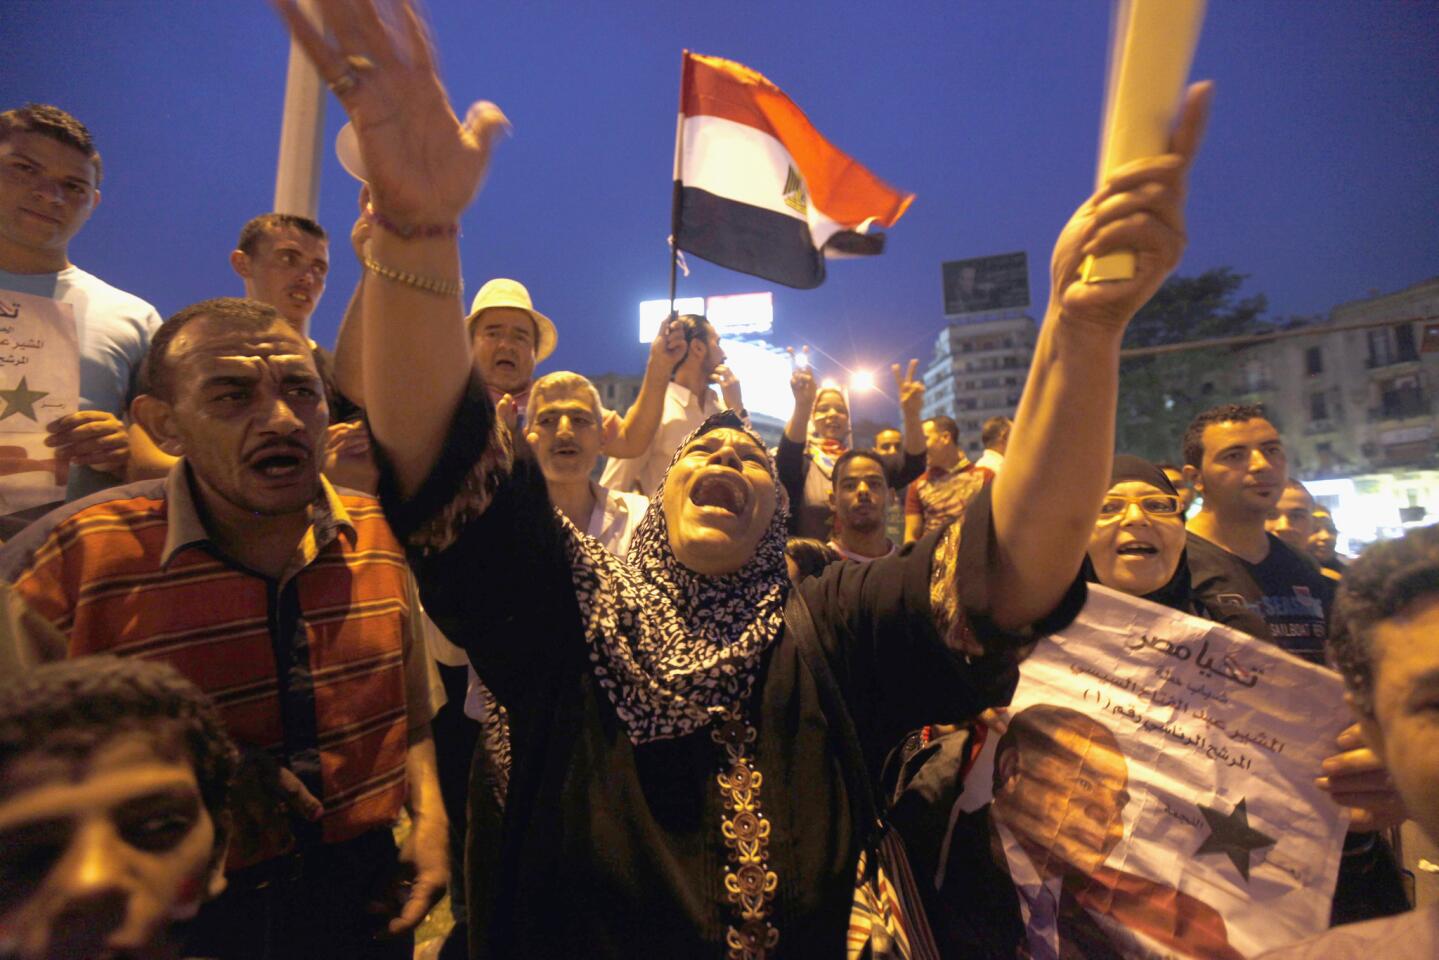 People in Cairo's Tahrir Square celebrate the election of former army chief Abdel Fattah Sisi as president of Egypt.